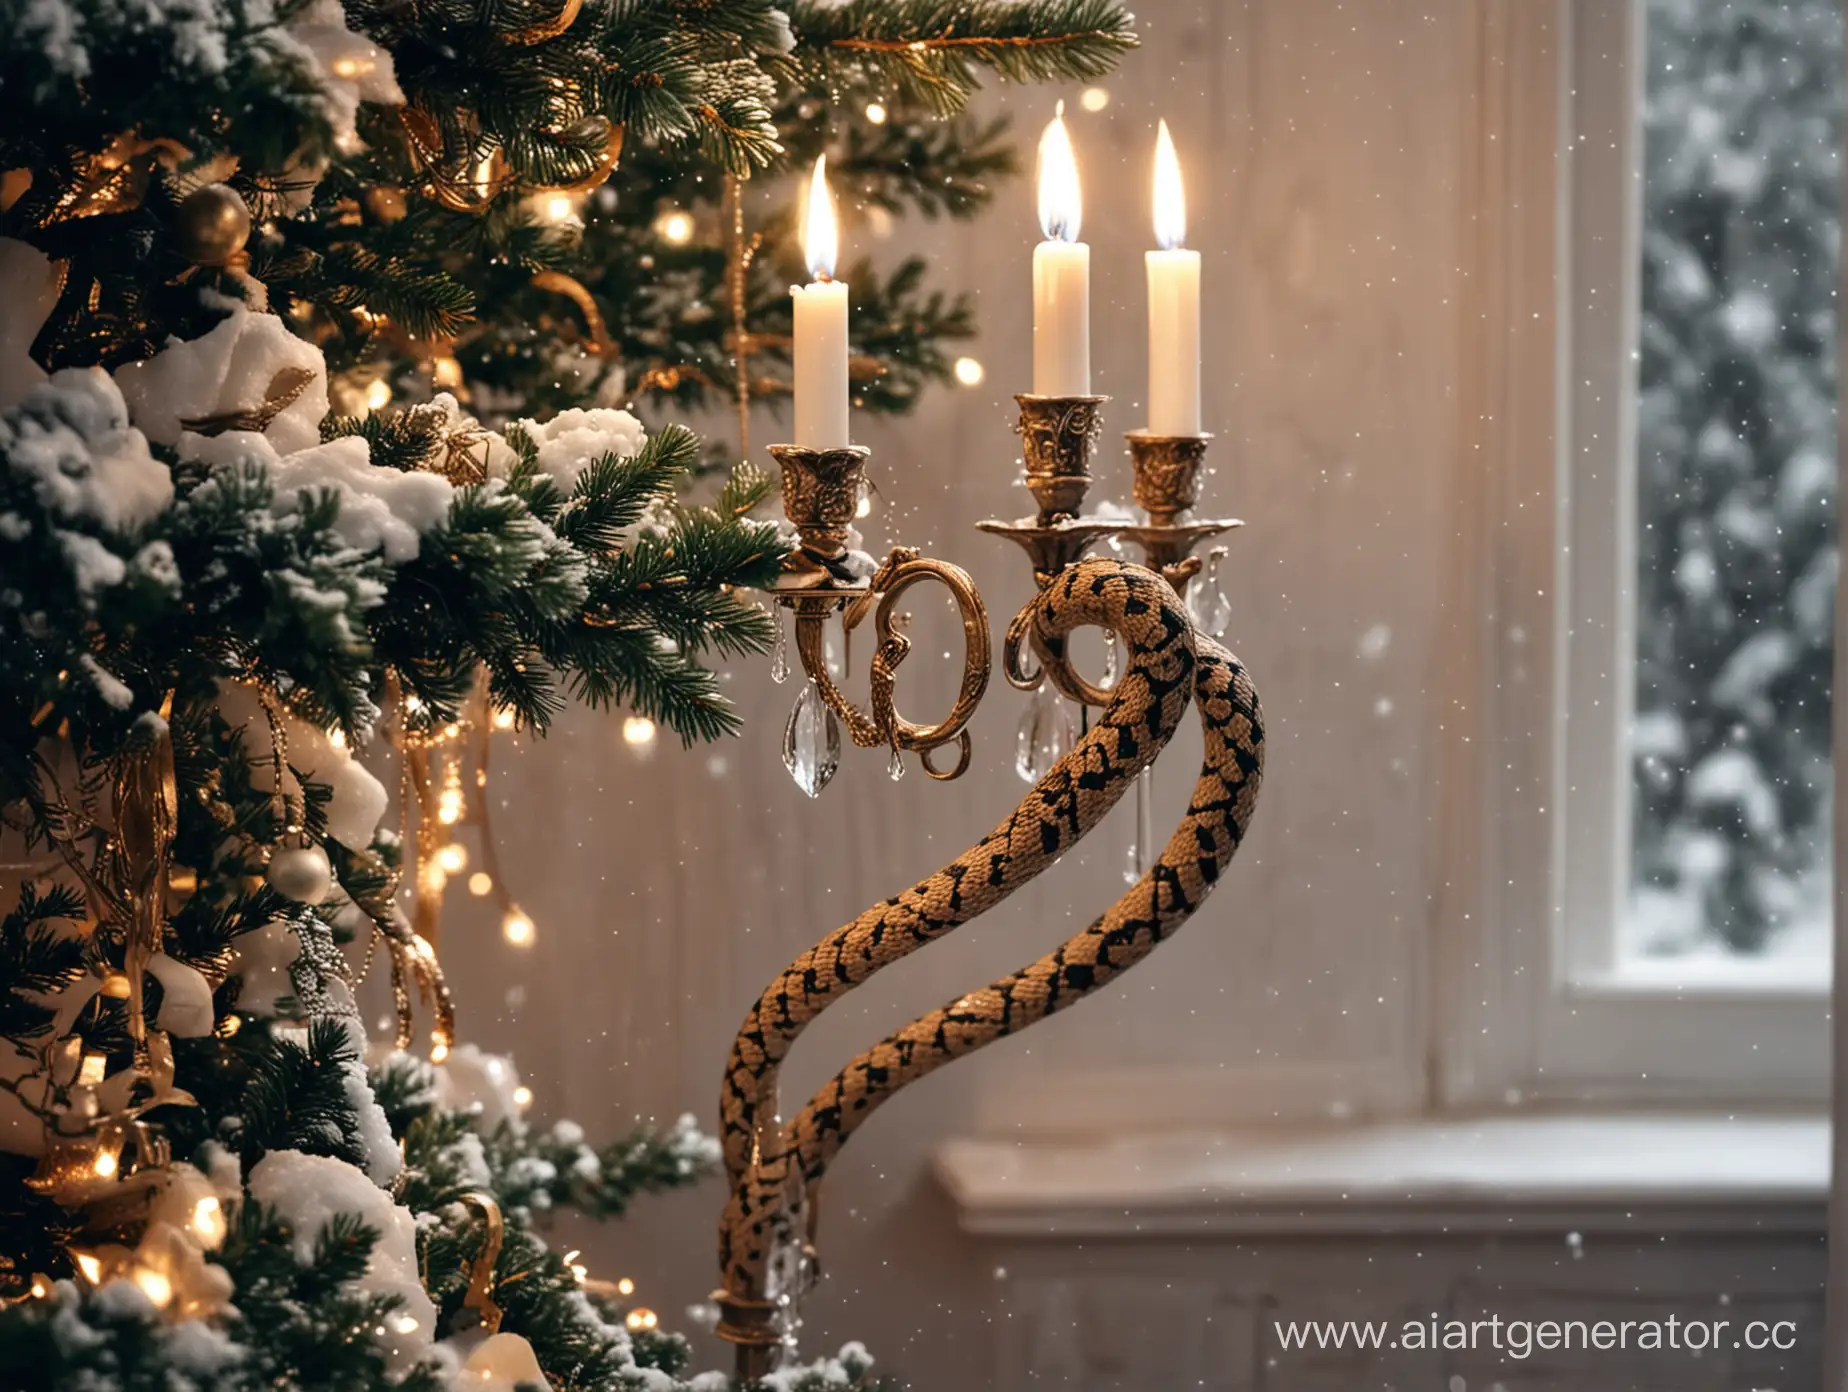 Christmas-Tree-Snake-Illuminated-by-Sconces-in-Snowy-Scene